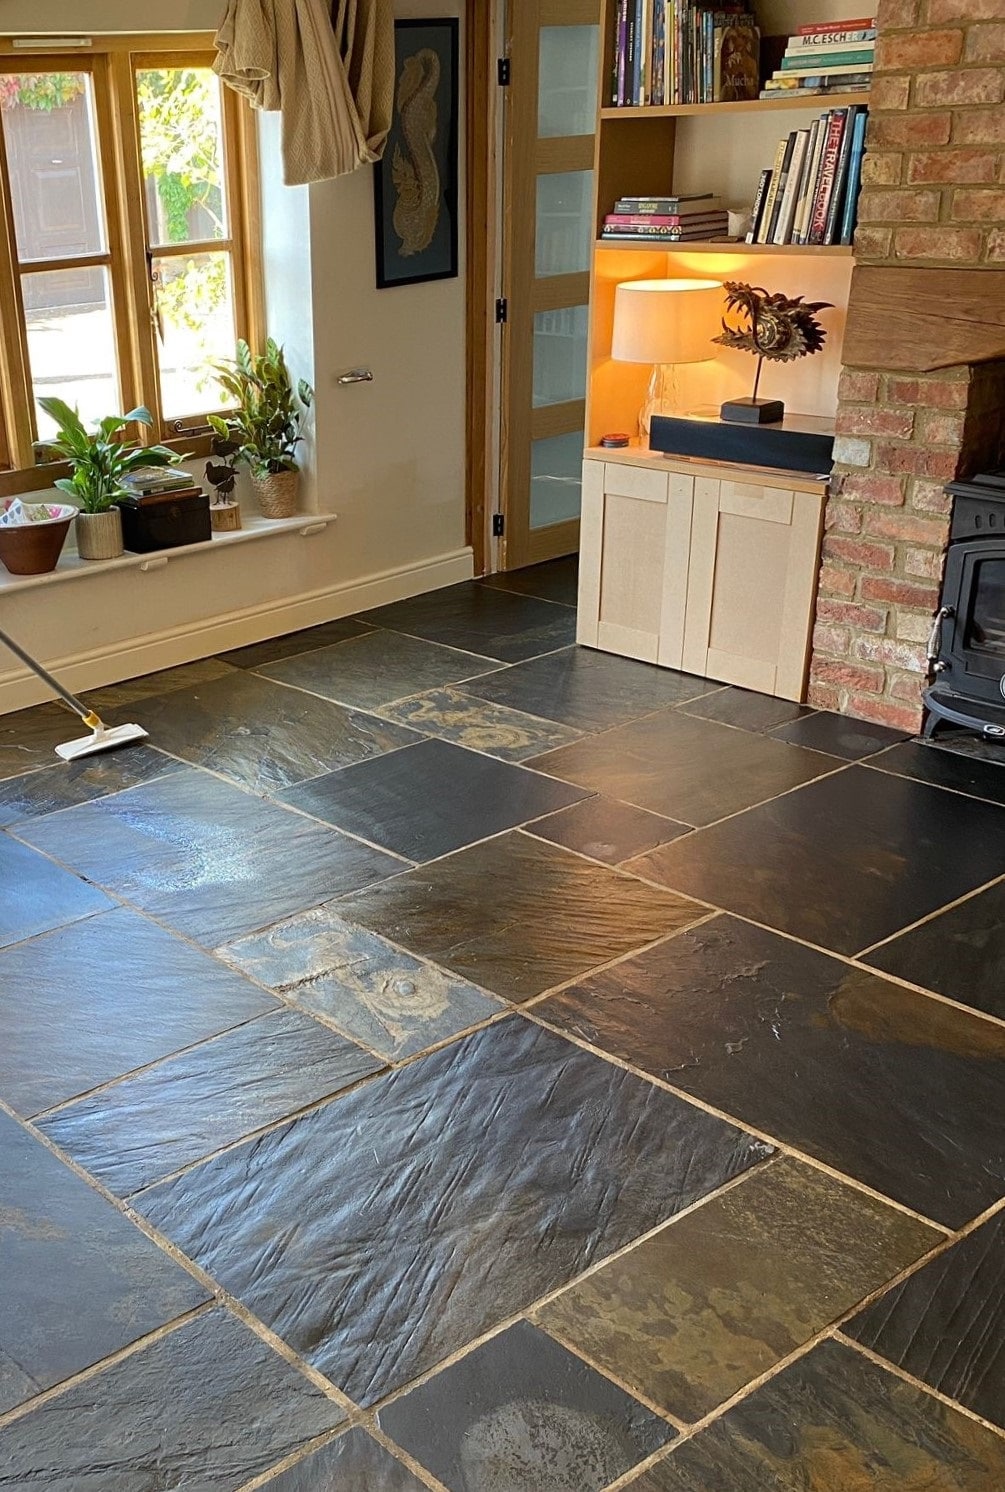 How to clean slate – easy guide for maintaining your slate floor!